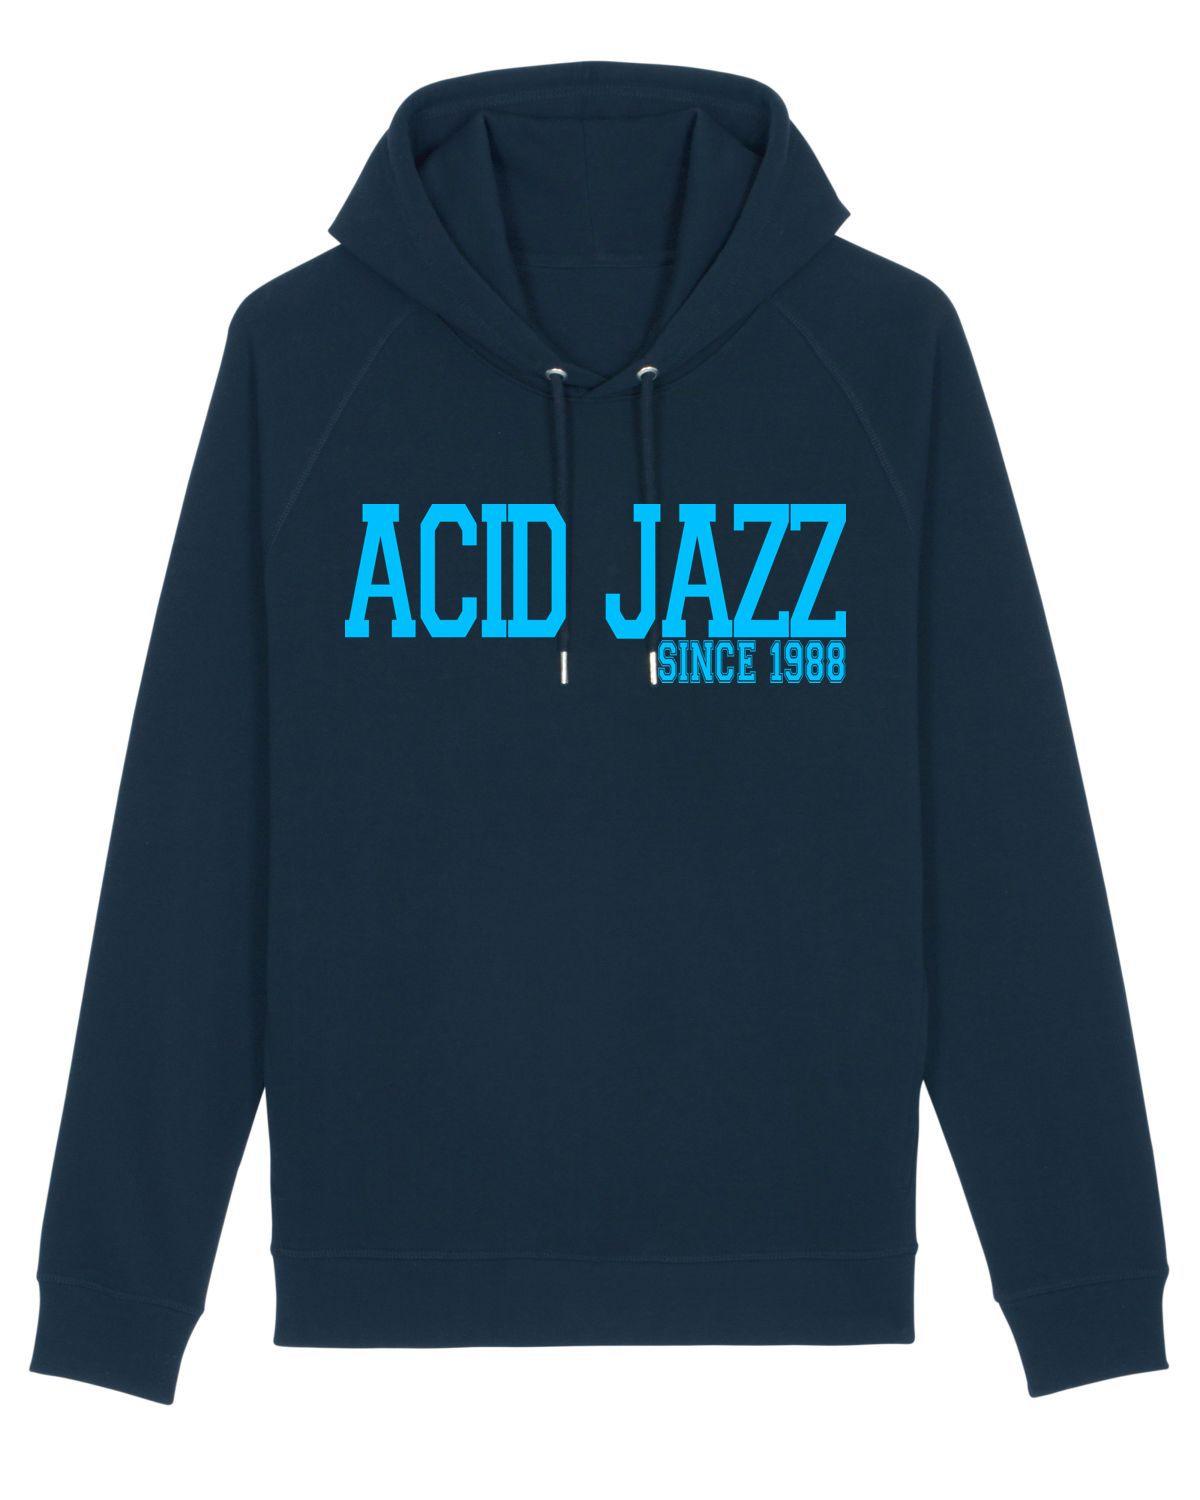 ACID JAZZ: 1988 Hoodie Official Merchandise of Acid Jazz Records - SOUND IS COLOUR